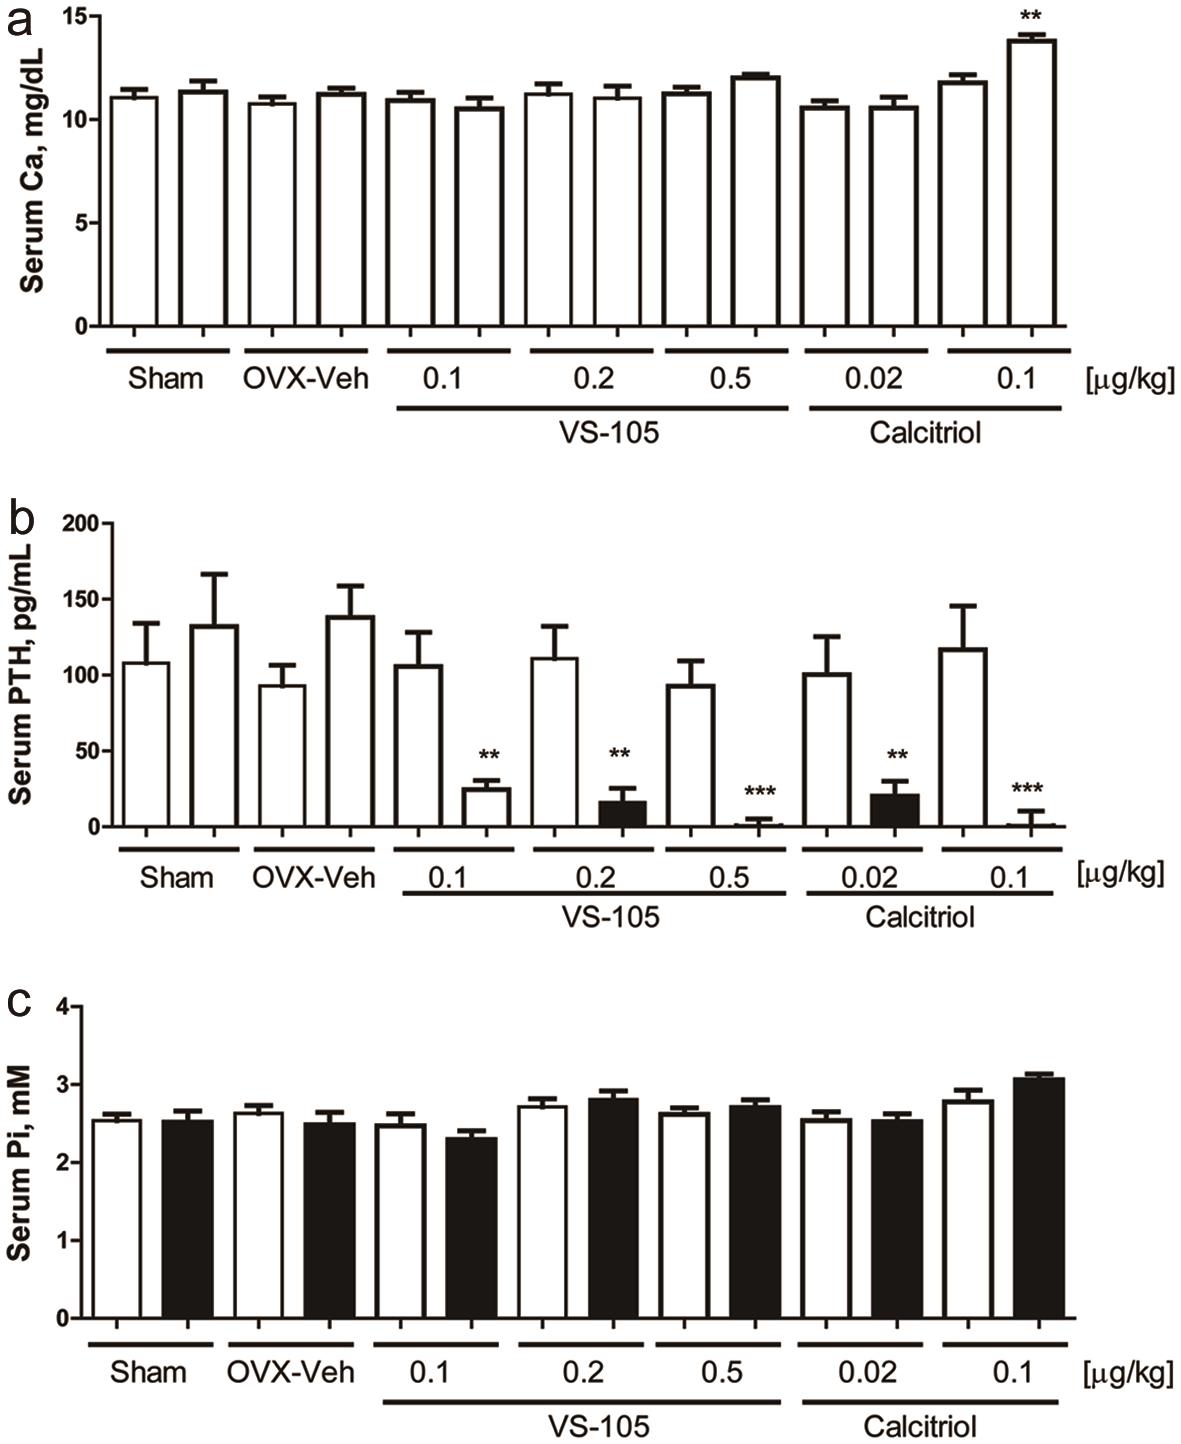 Effects of VS-105 and calcitriol on serum Ca, Pi, and PTH levels in OVX rats.